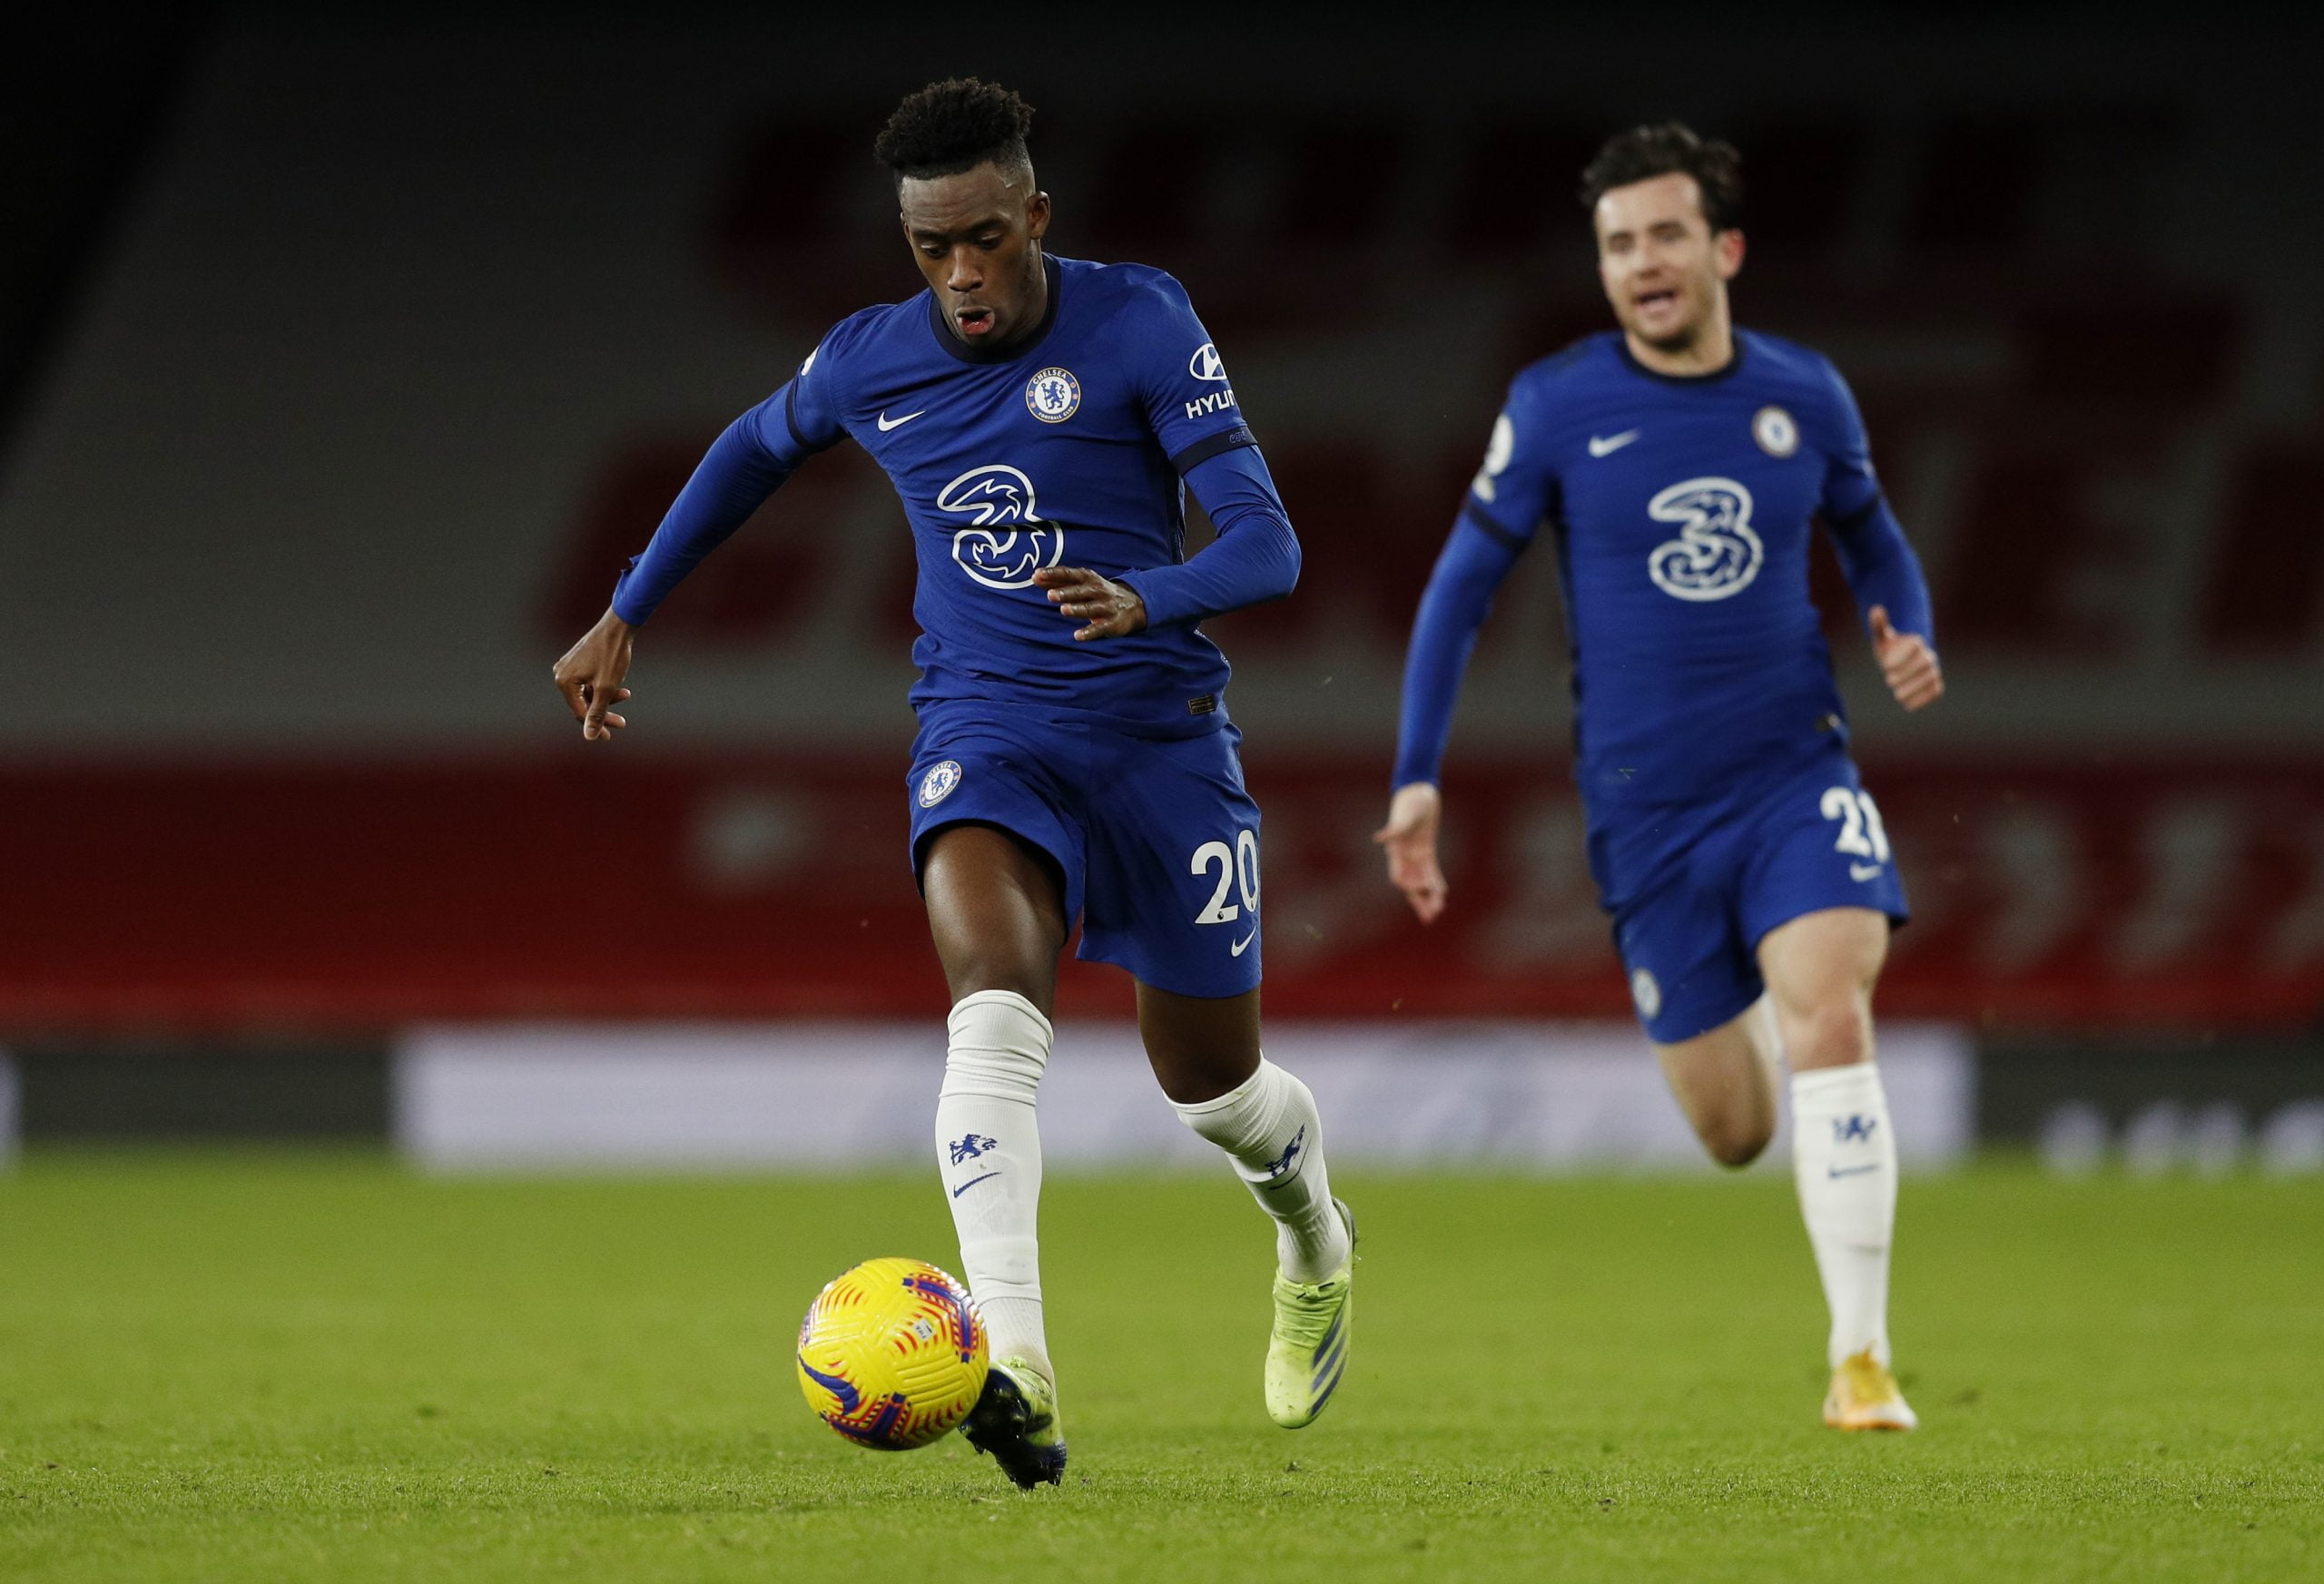 Chelsea players rated in disappointing loss vs Leicester City (Chelsea's Hudson-Odoi is seen in the photo)